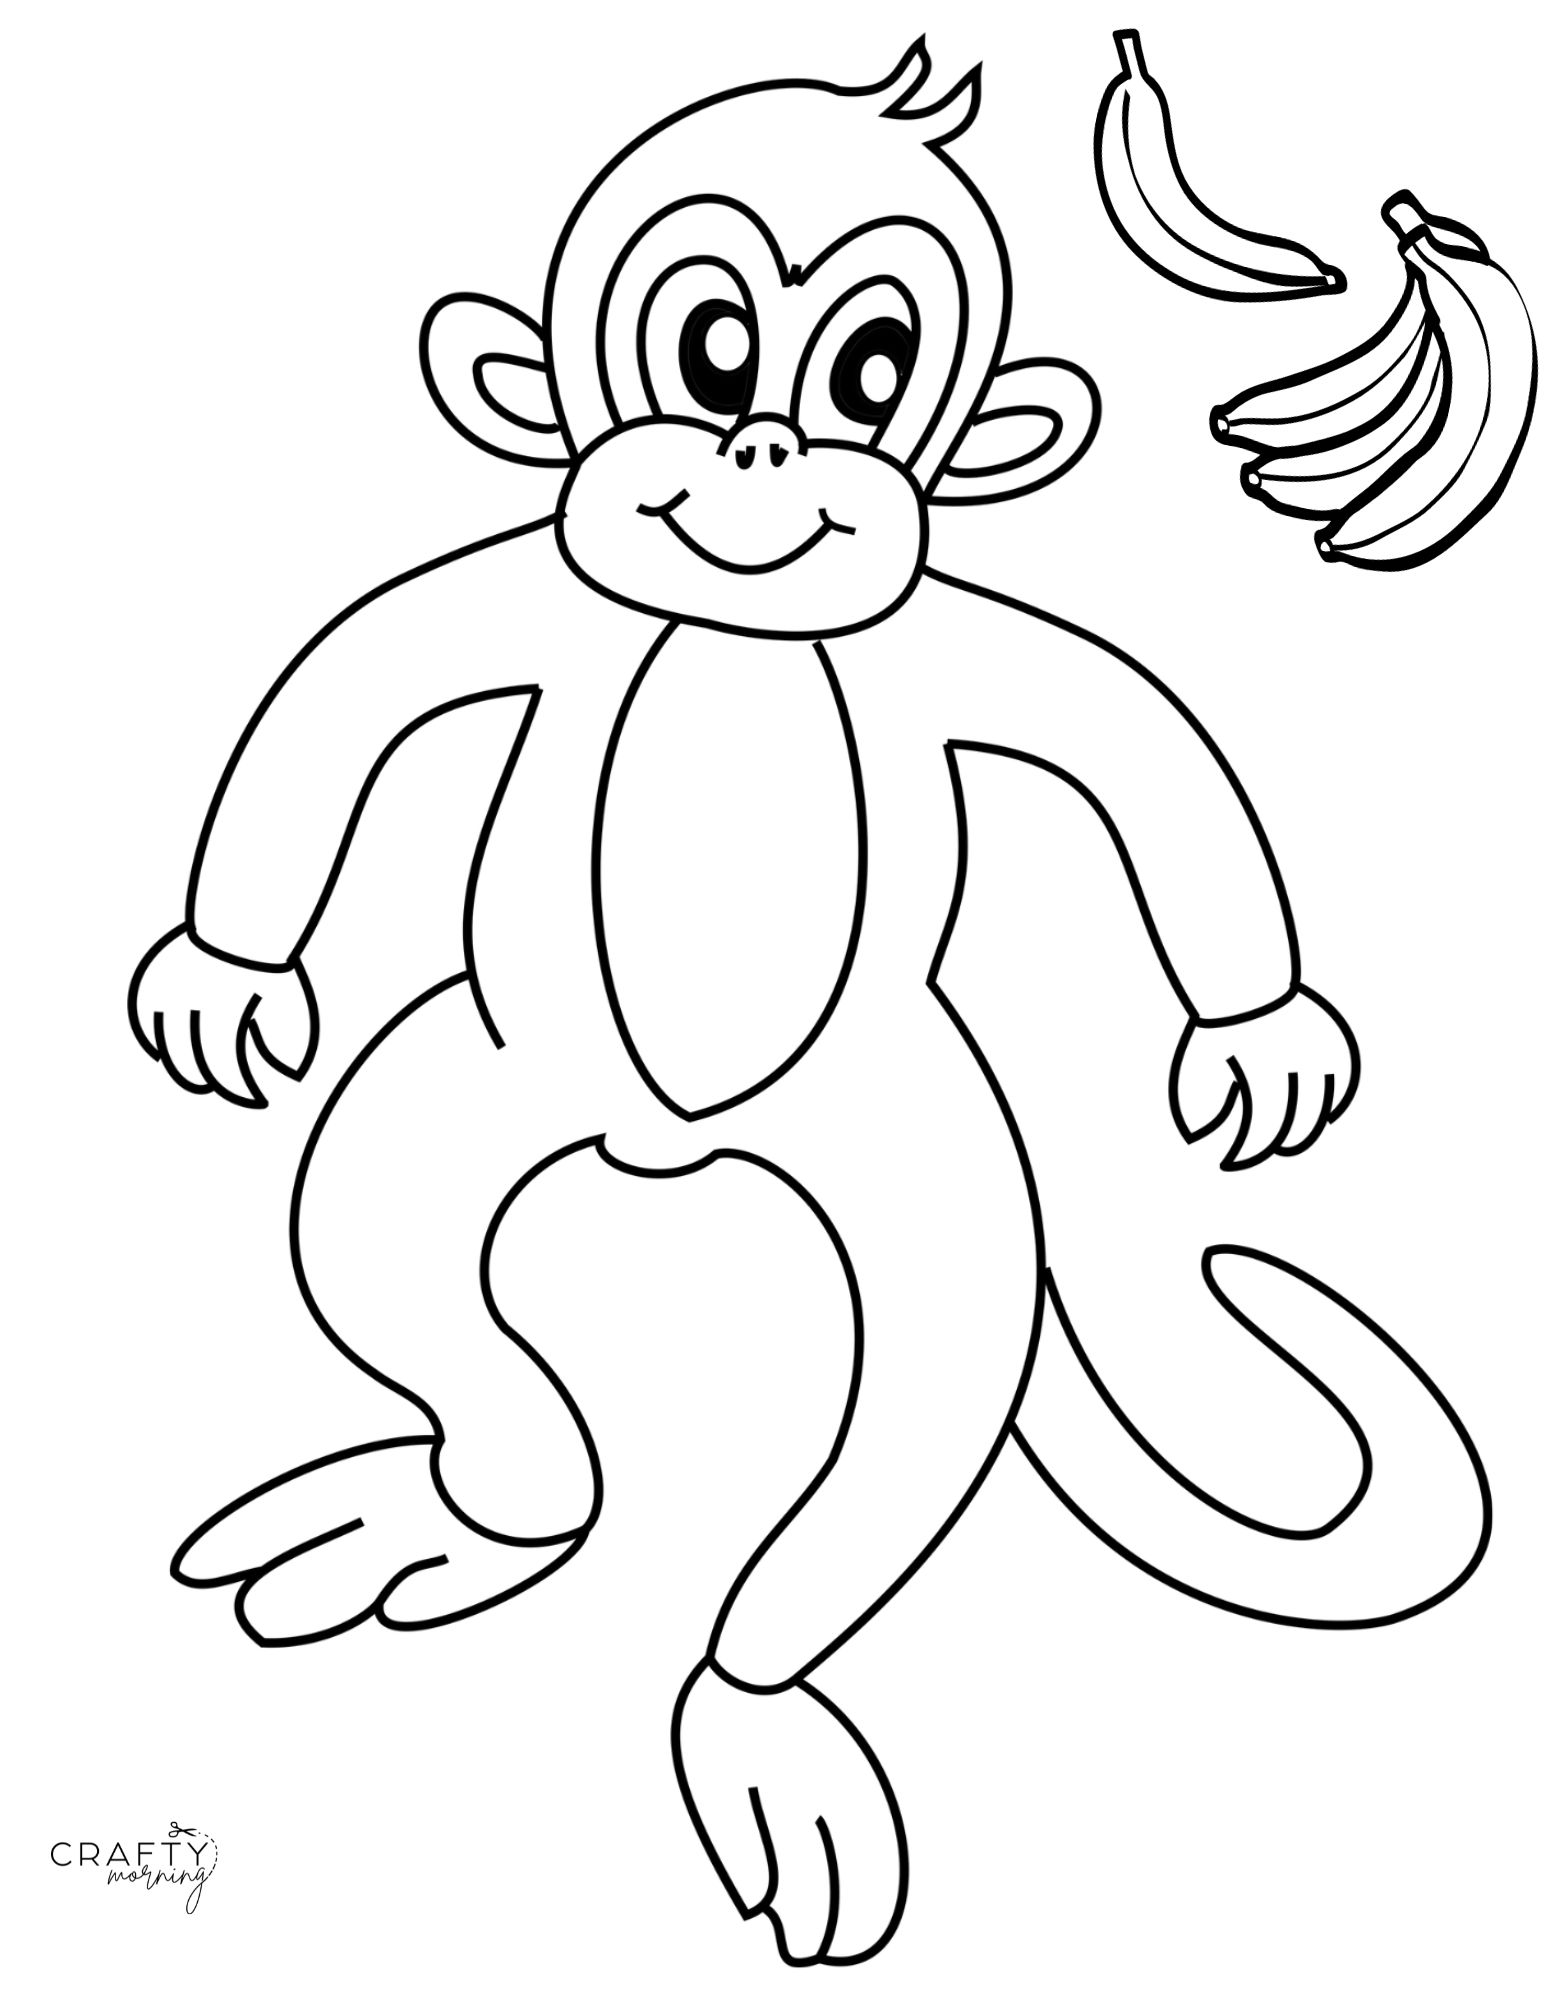 A pencil drawing sketch of a monkey, full white body, black and white  background, left to right angle, children's colouring book on Craiyon